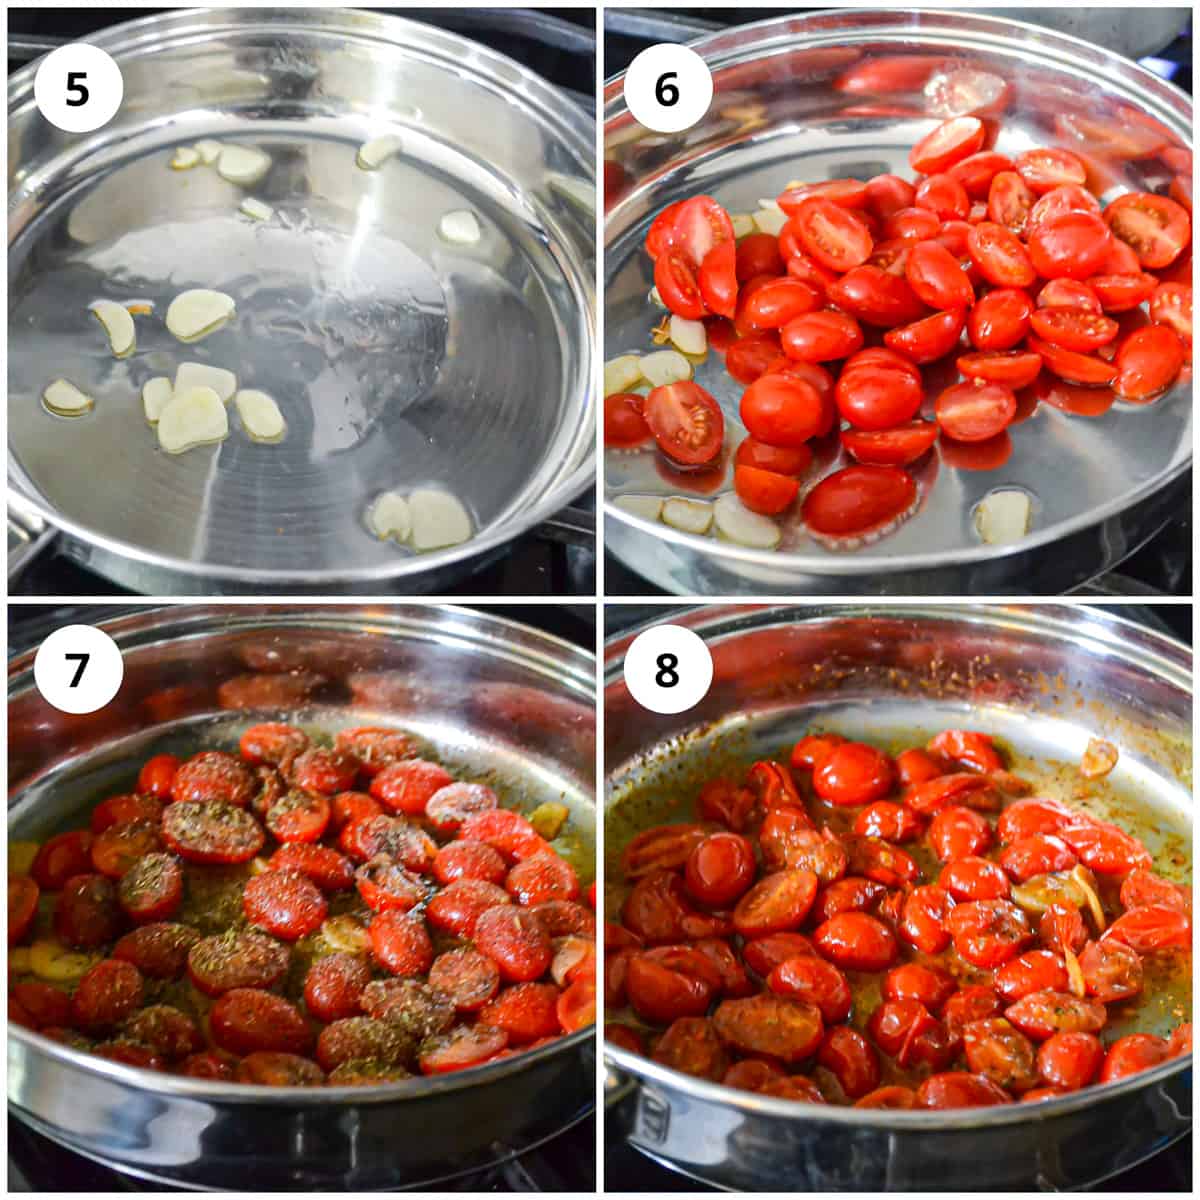 Cooking the tomatoes in a pan